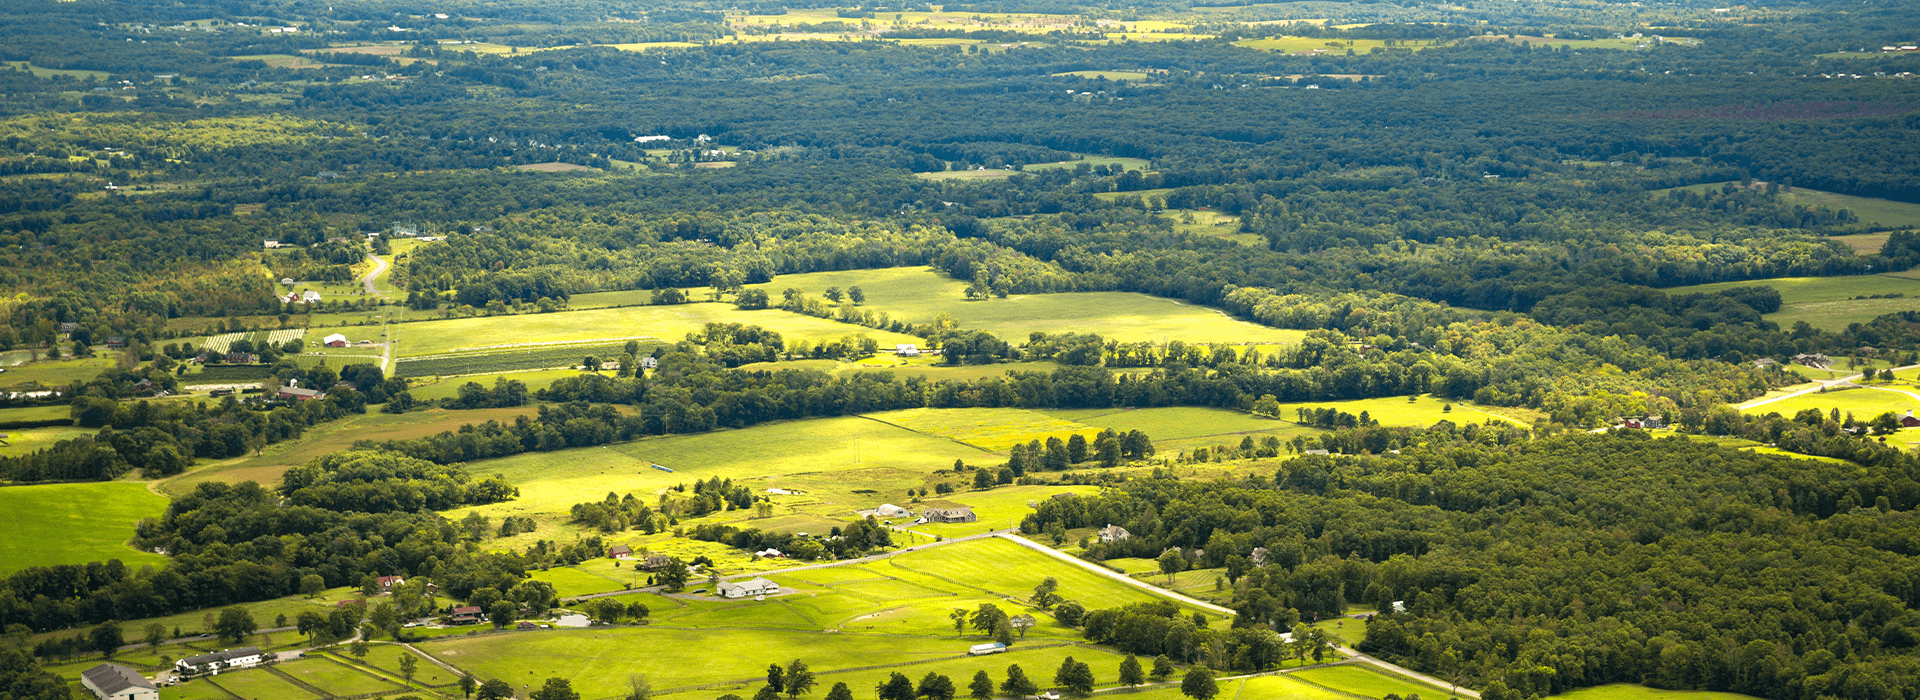 Overhead view of Hudson Valley